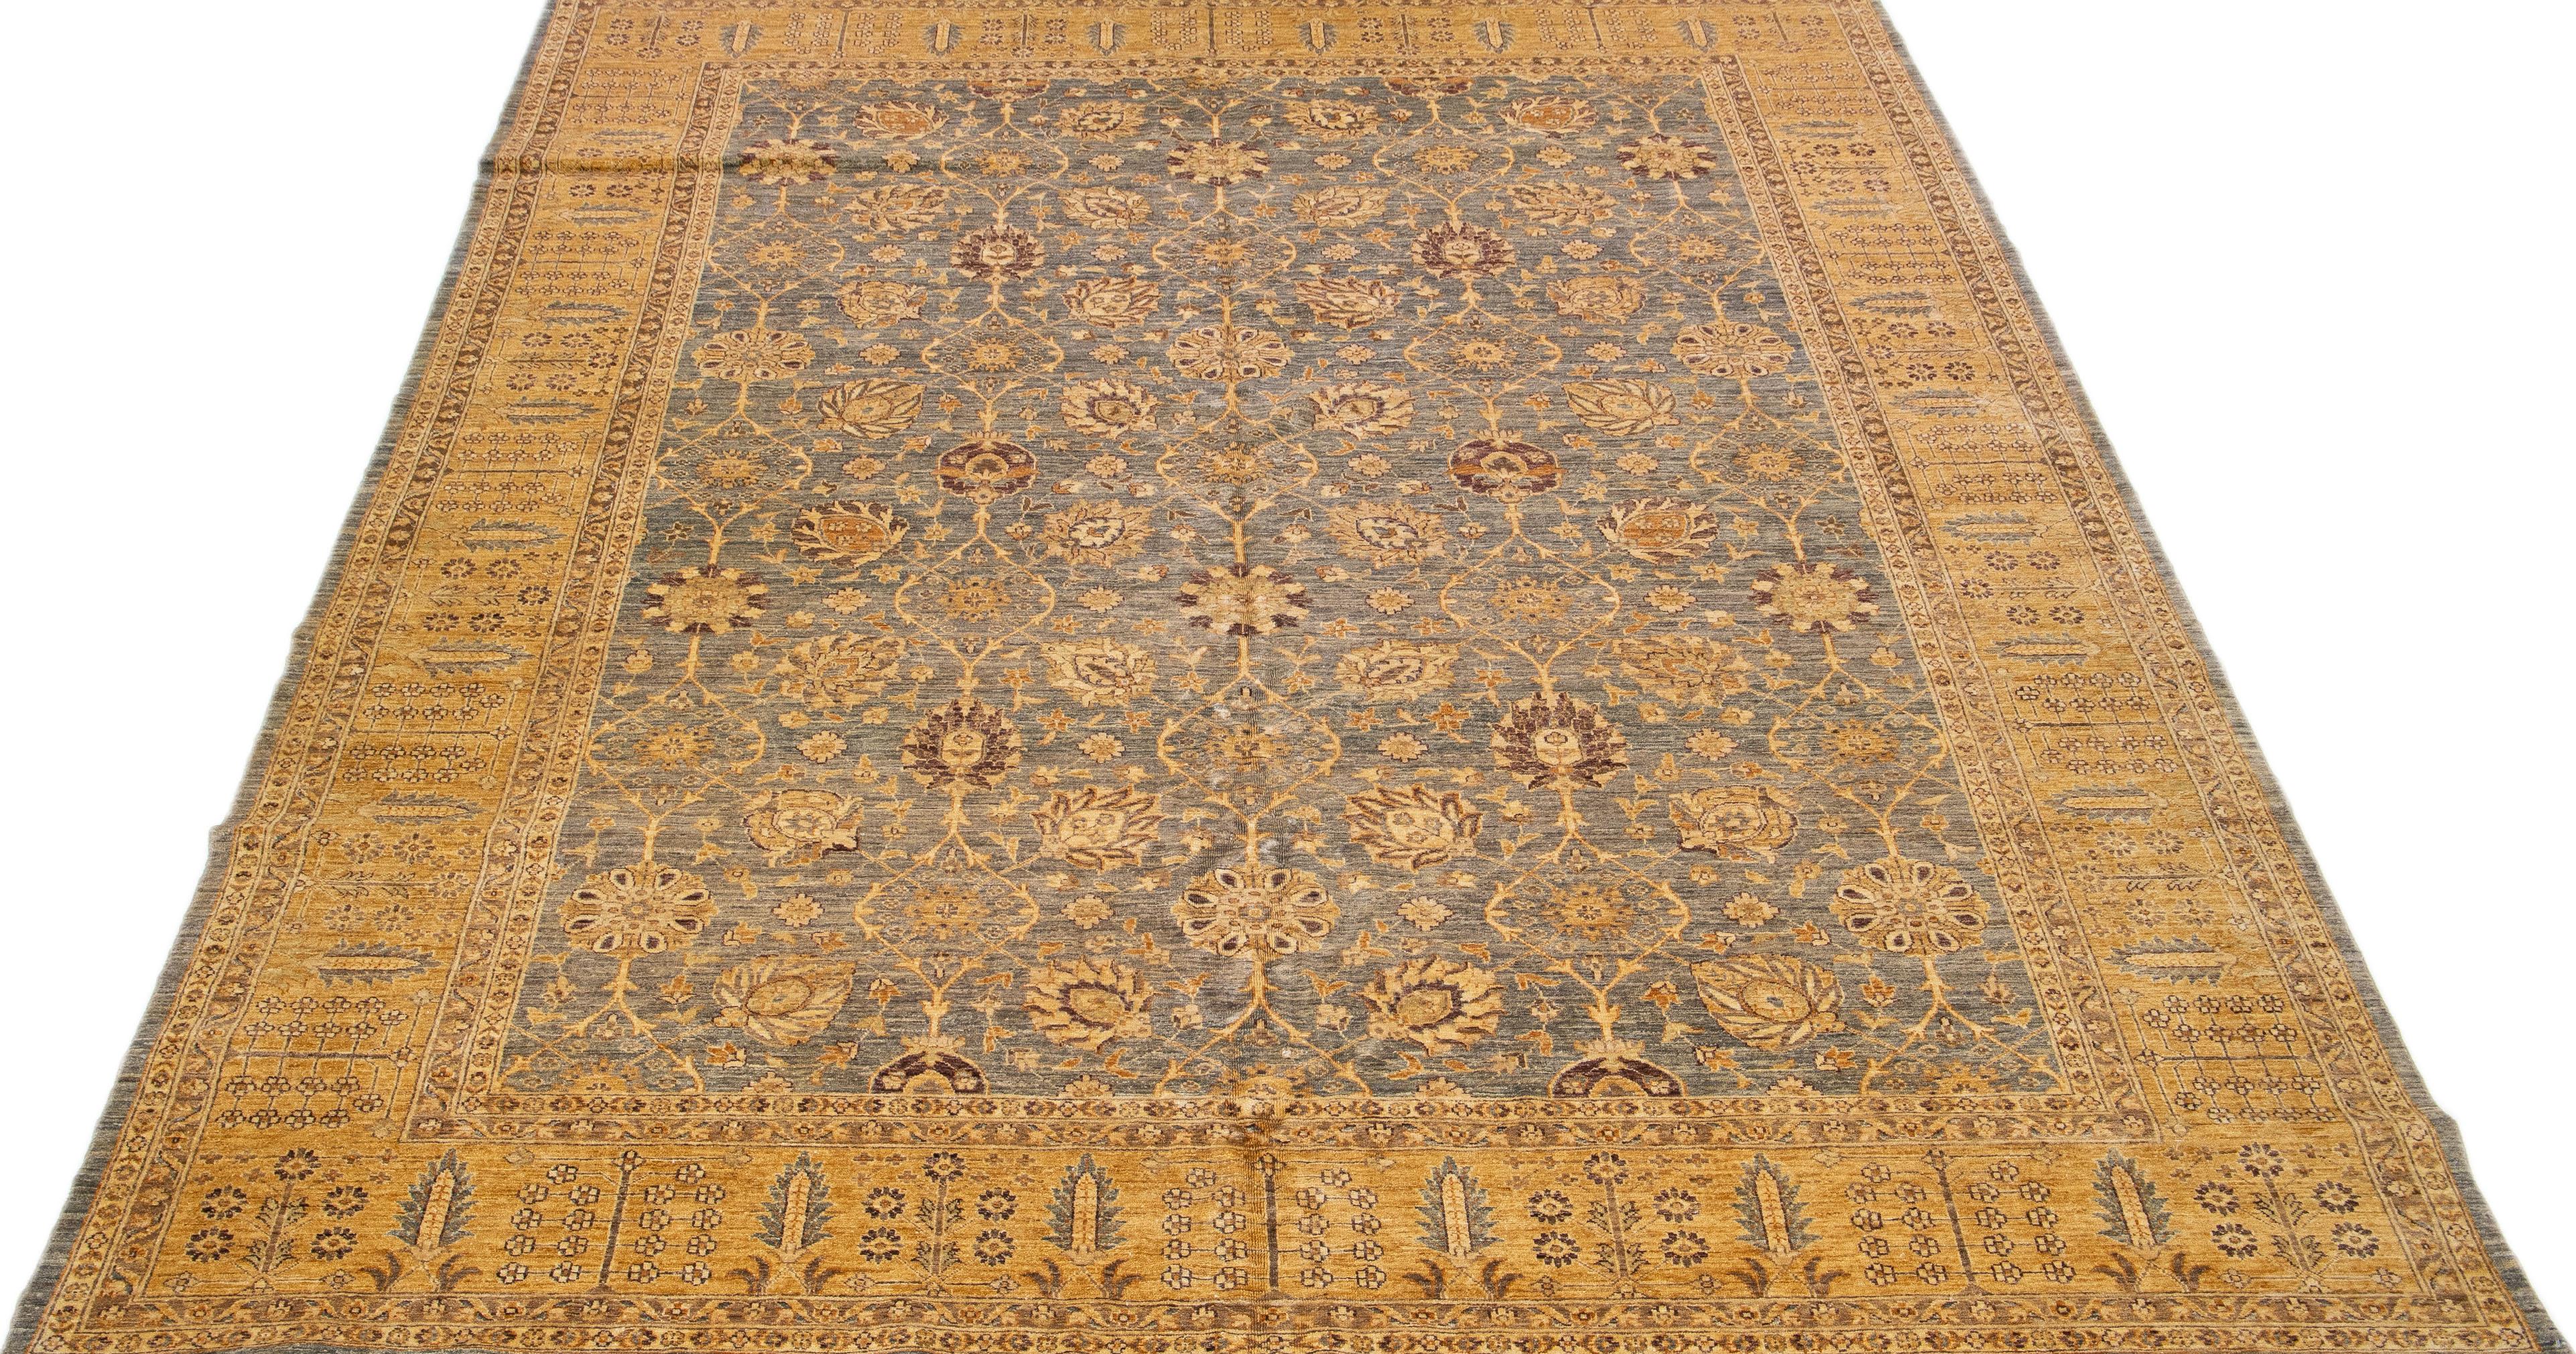 Beautiful Paki Peshawar hand-knotted wool rug with a gray color field. This modern rug has a goldenrod frame with gray and brown accents, a beautiful all-over Classic vine scroll, and a palmettes motif.

This rug measures: 10' x 13'7